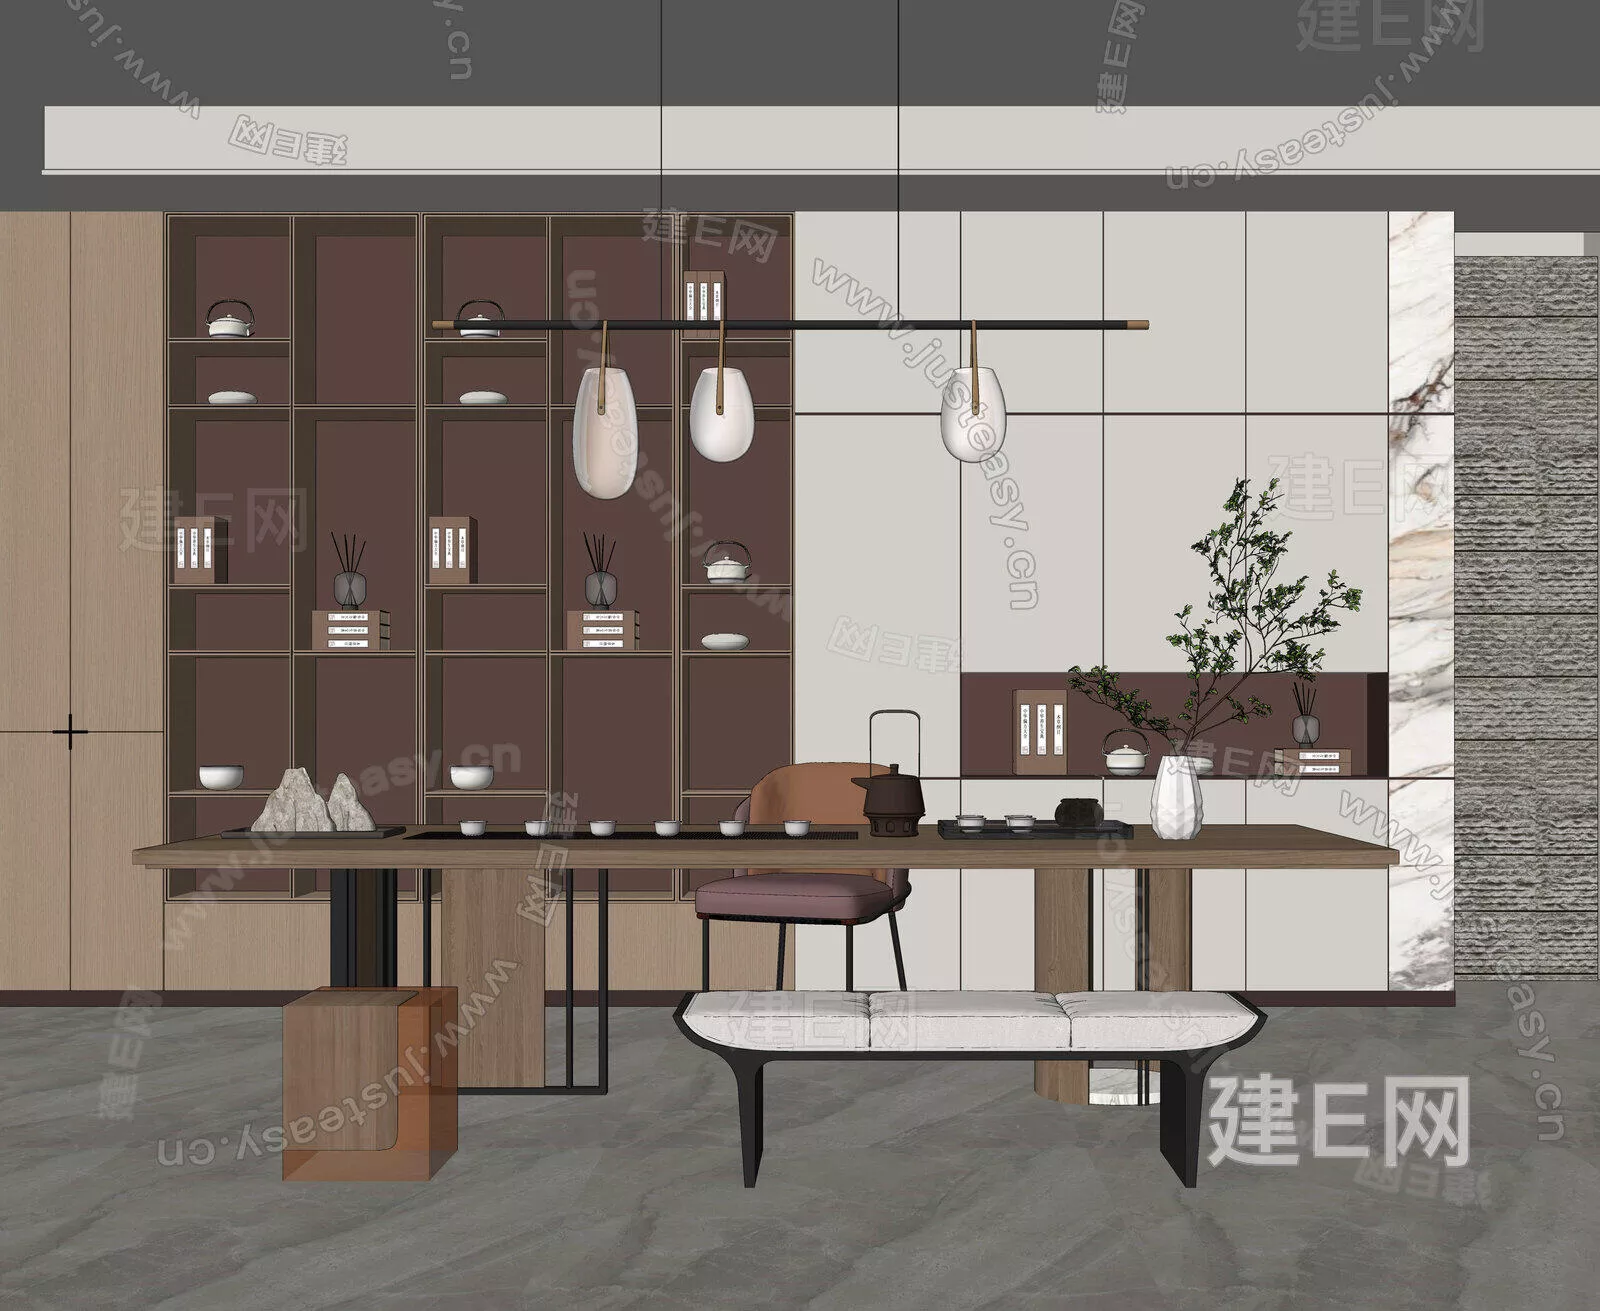 CHINESE TEAROOM - SKETCHUP 3D SCENE - ENSCAPE - 112411697